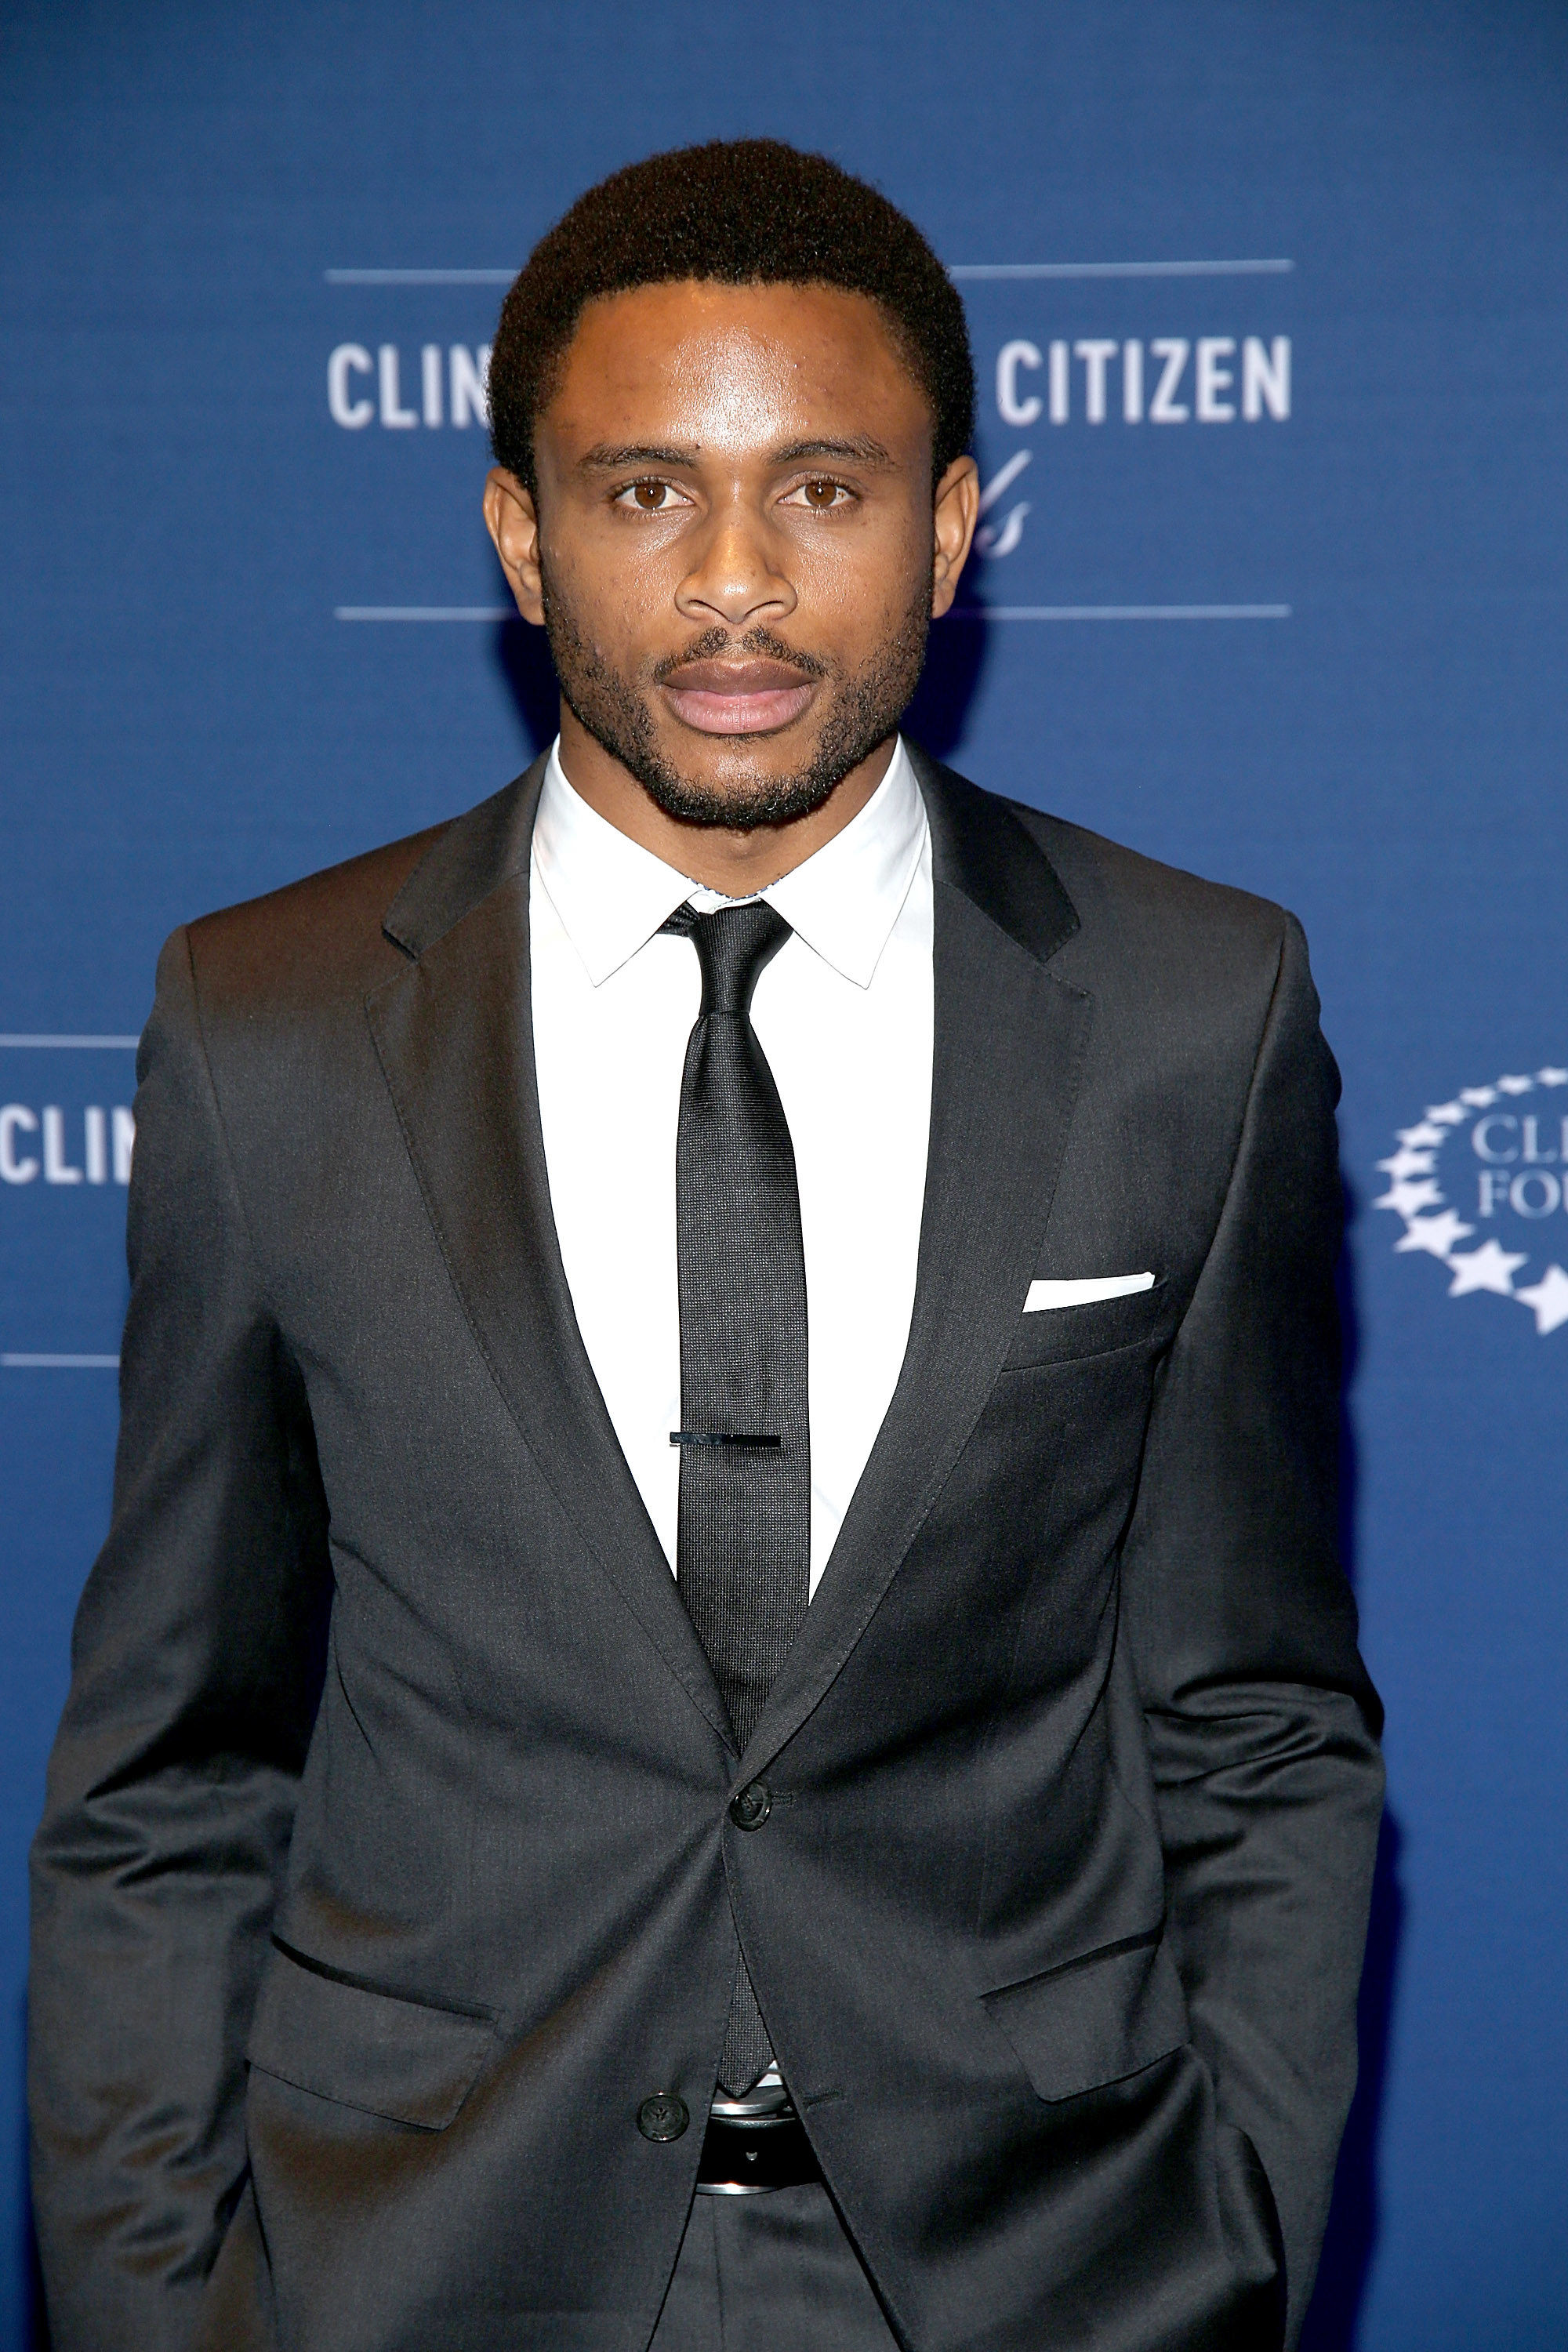 Nnamdi on the red carpet